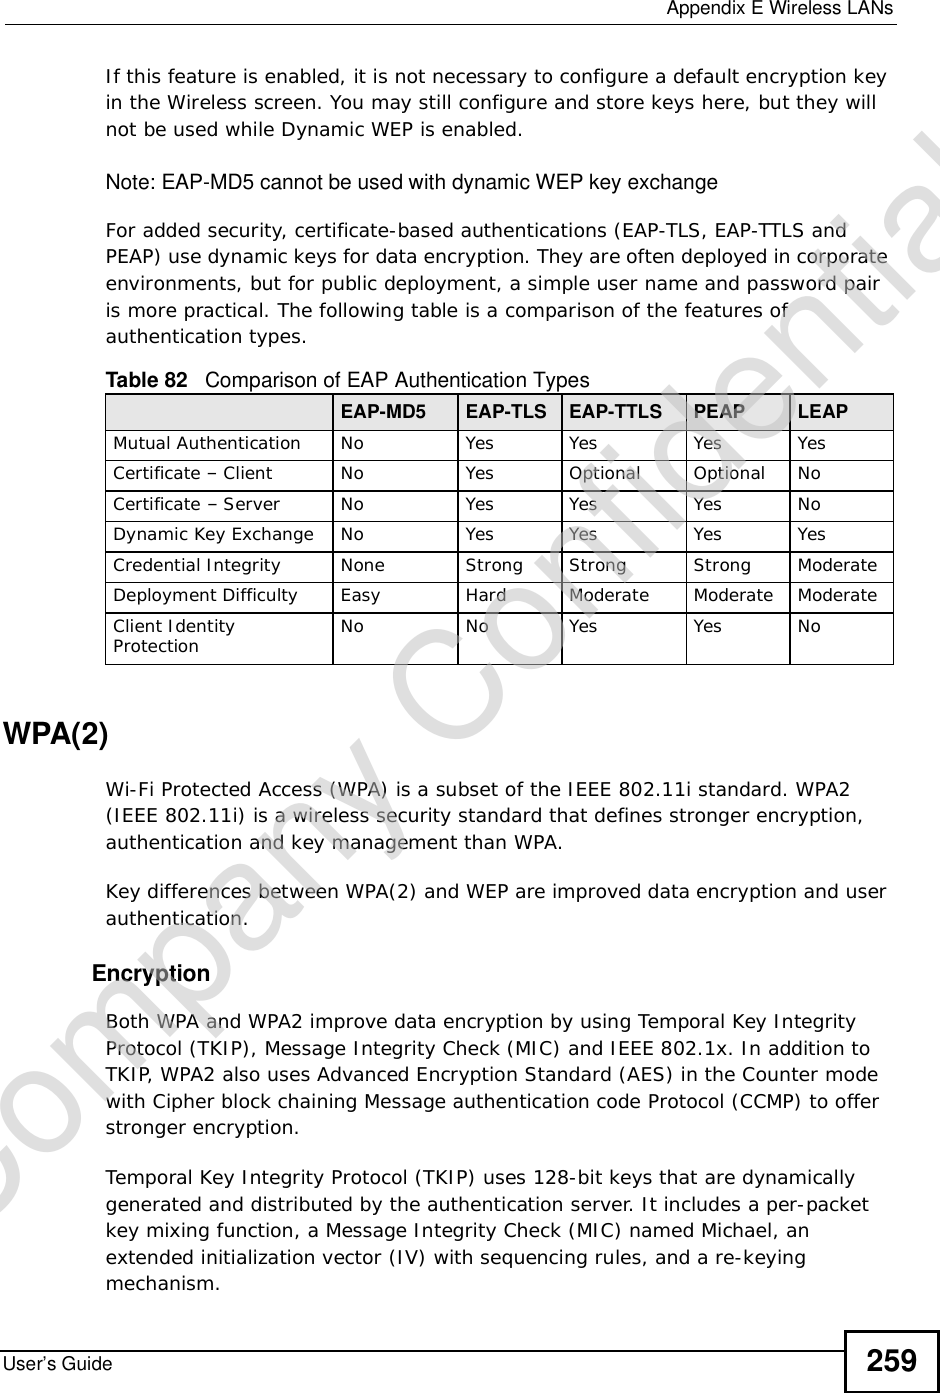  Appendix EWireless LANsUser’s Guide 259If this feature is enabled, it is not necessary to configure a default encryption key in the Wireless screen. You may still configure and store keys here, but they will not be used while Dynamic WEP is enabled.Note: EAP-MD5 cannot be used with dynamic WEP key exchangeFor added security, certificate-based authentications (EAP-TLS, EAP-TTLS and PEAP) use dynamic keys for data encryption. They are often deployed in corporate environments, but for public deployment, a simple user name and password pair is more practical. The following table is a comparison of the features of authentication types.WPA(2)Wi-Fi Protected Access (WPA) is a subset of the IEEE 802.11i standard. WPA2 (IEEE 802.11i) is a wireless security standard that defines stronger encryption, authentication and key management than WPA. Key differences between WPA(2) and WEP are improved data encryption and user authentication.    EncryptionBoth WPA and WPA2 improve data encryption by using Temporal Key Integrity Protocol (TKIP), Message Integrity Check (MIC) and IEEE 802.1x. In addition to TKIP, WPA2 also uses Advanced Encryption Standard (AES) in the Counter mode with Cipher block chaining Message authentication code Protocol (CCMP) to offer stronger encryption. Temporal Key Integrity Protocol (TKIP) uses 128-bit keys that are dynamically generated and distributed by the authentication server. It includes a per-packet key mixing function, a Message Integrity Check (MIC) named Michael, an extended initialization vector (IV) with sequencing rules, and a re-keying mechanism.Table 82   Comparison of EAP Authentication TypesEAP-MD5 EAP-TLS EAP-TTLS PEAP LEAPMutual Authentication No Yes Yes Yes YesCertificate – Client No Yes Optional Optional NoCertificate – Server No Yes Yes Yes NoDynamic Key Exchange No Yes Yes Yes YesCredential Integrity None Strong Strong Strong ModerateDeployment Difficulty Easy Hard Moderate Moderate ModerateClient Identity Protection No No Yes Yes NoCompany Confidential